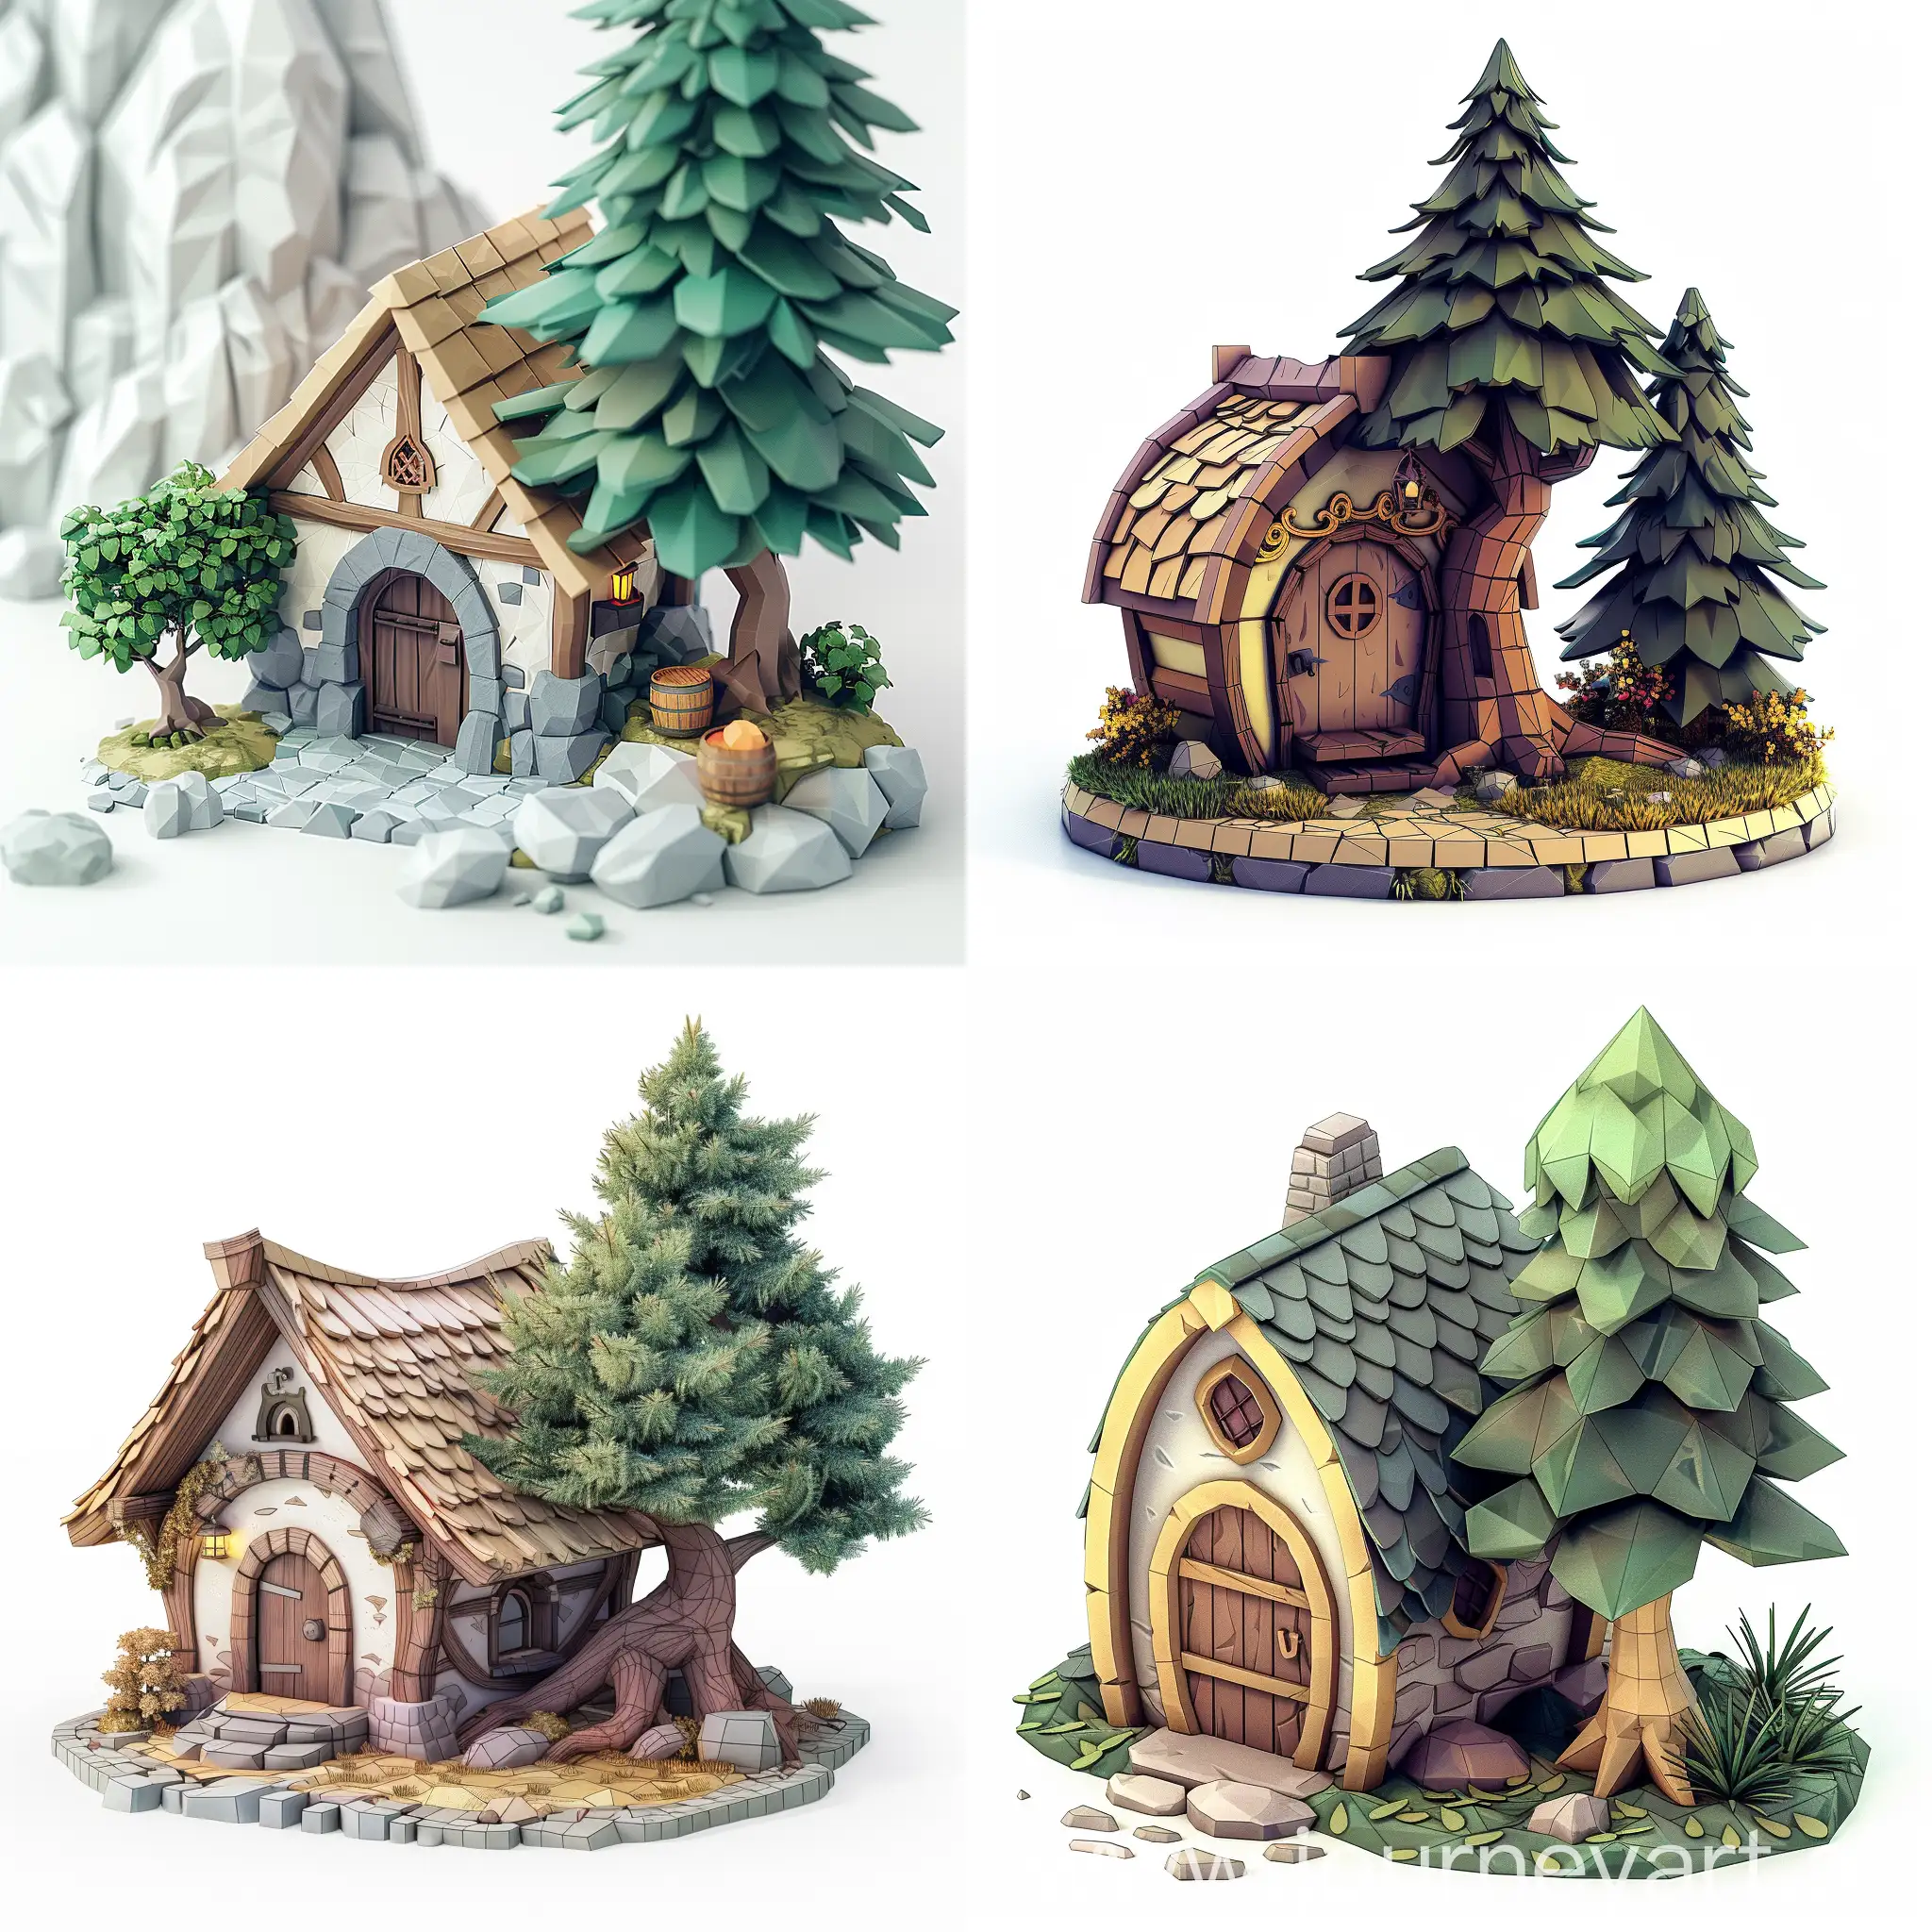 Whimsical-Isometric-Hut-and-Pine-Tree-Playful-3D-Render-with-Innovative-Design